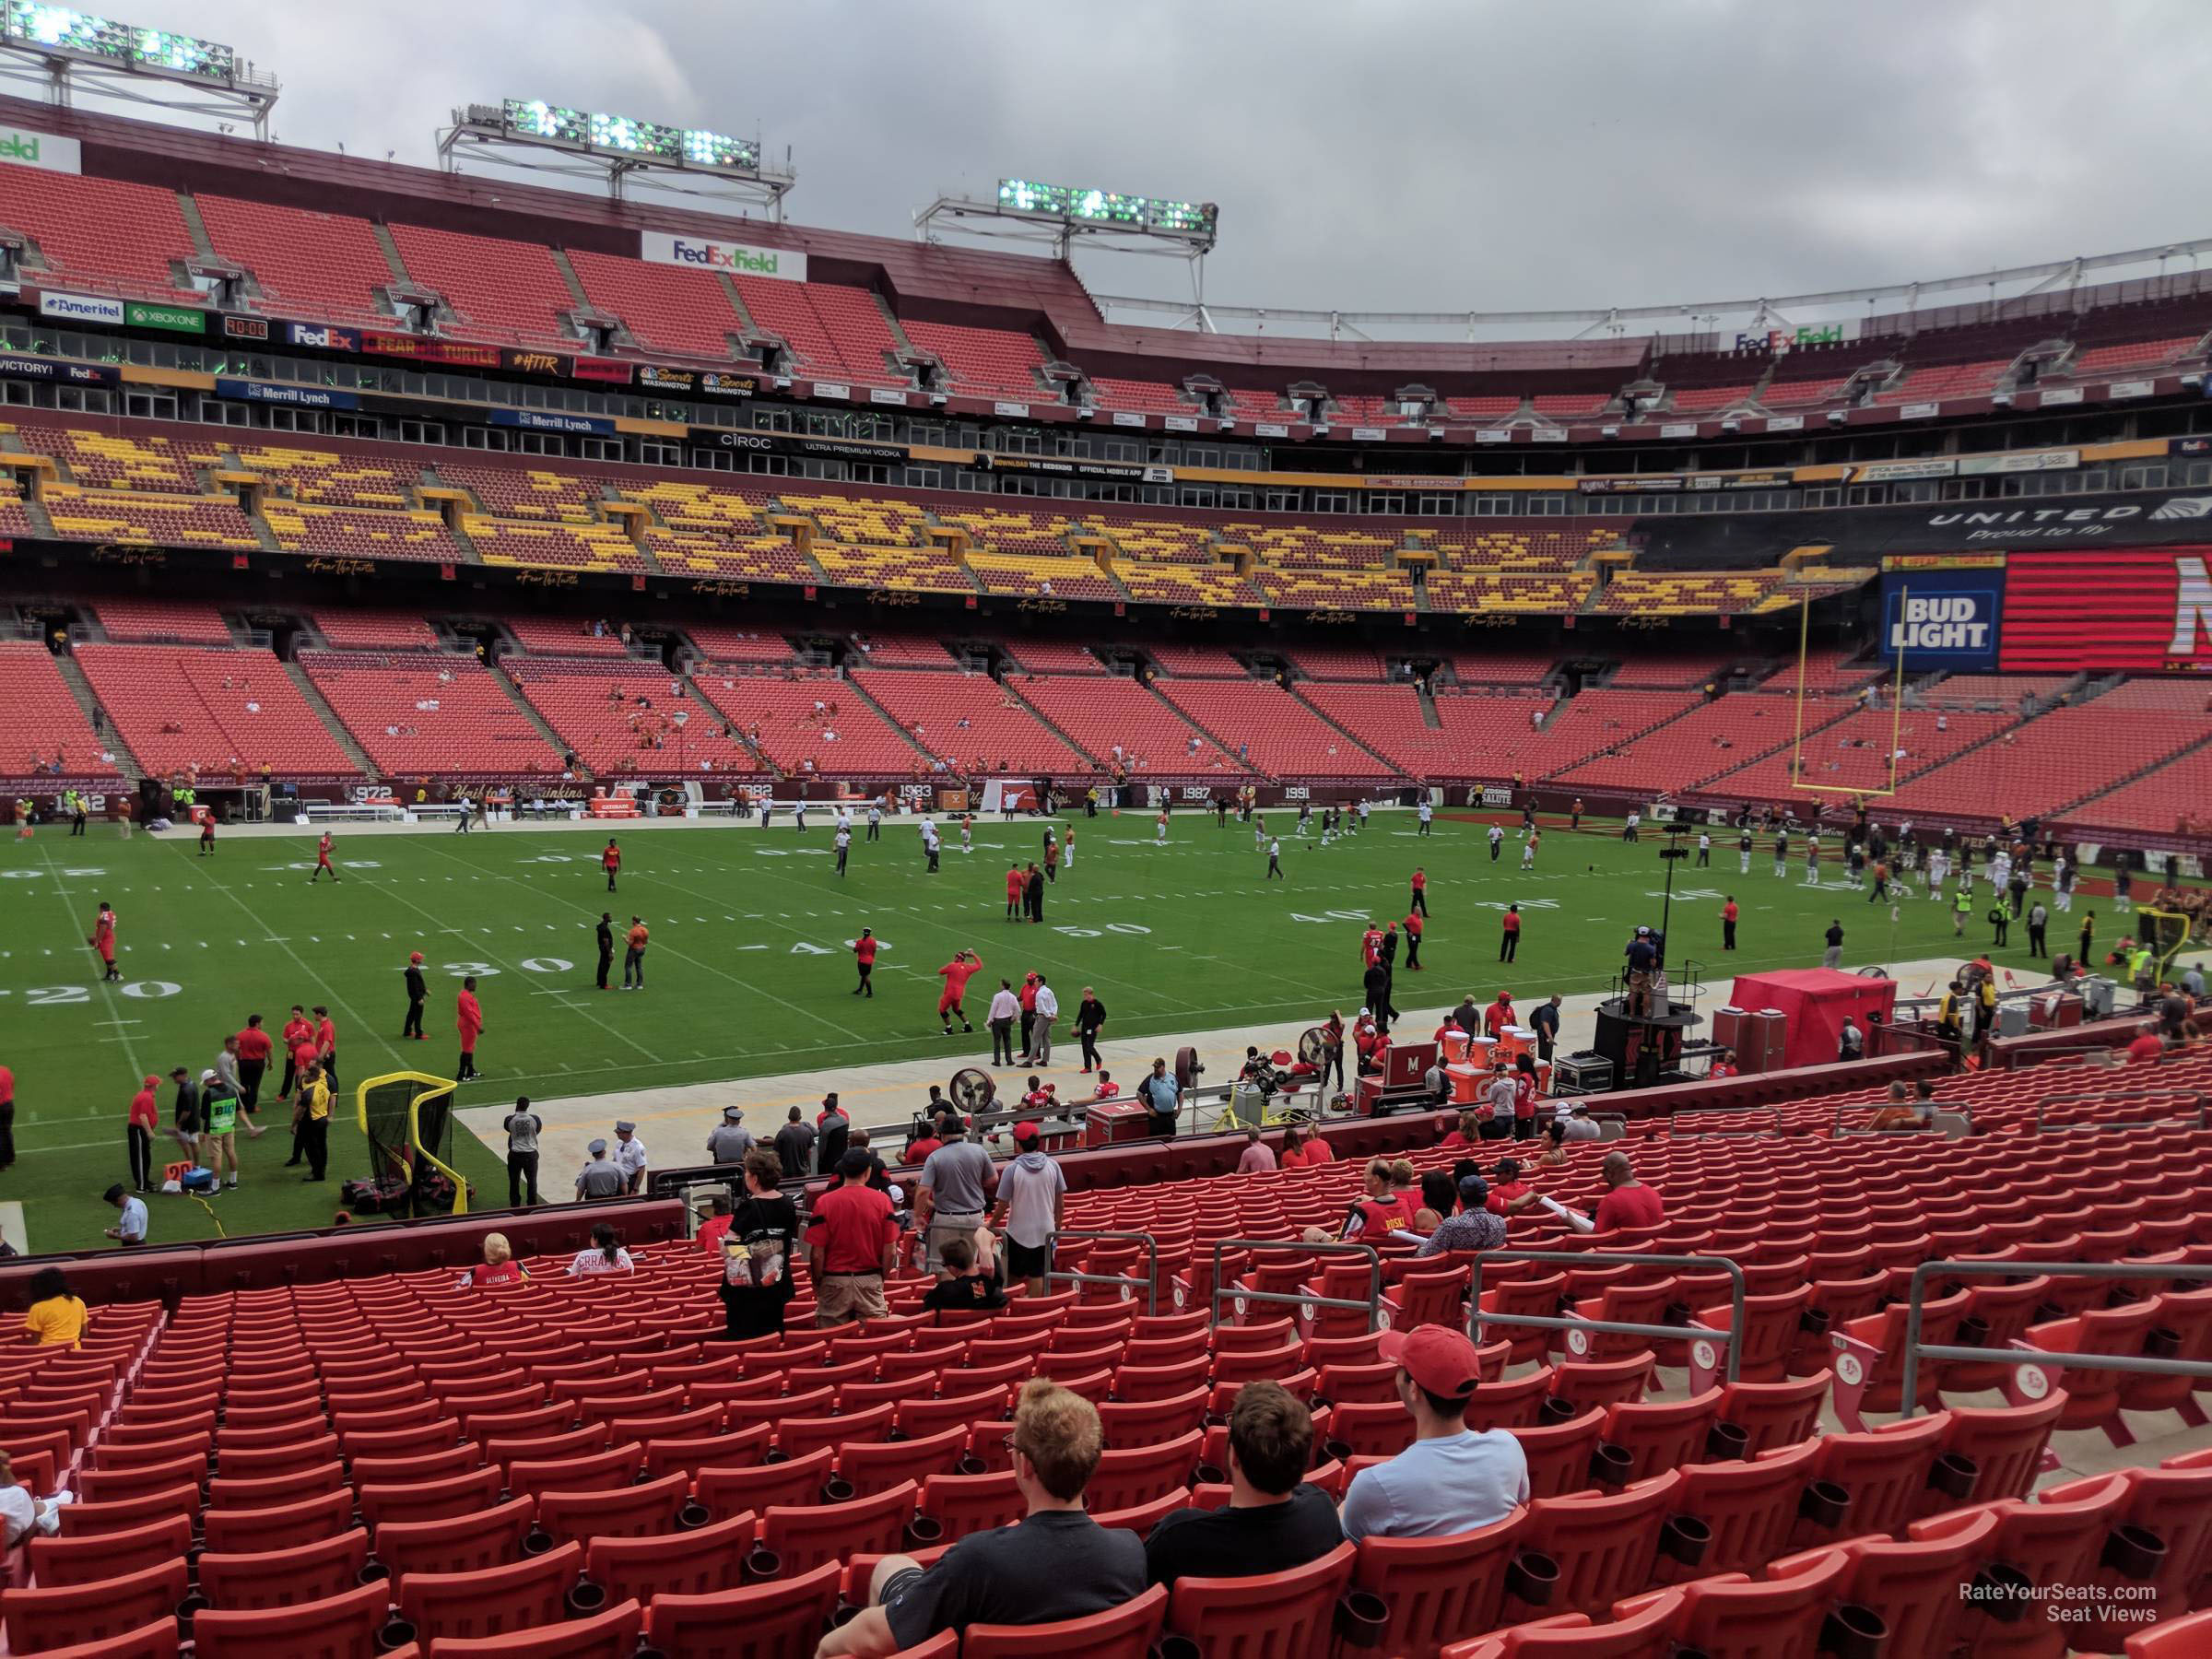 section 103, row 25 seat view  - fedexfield